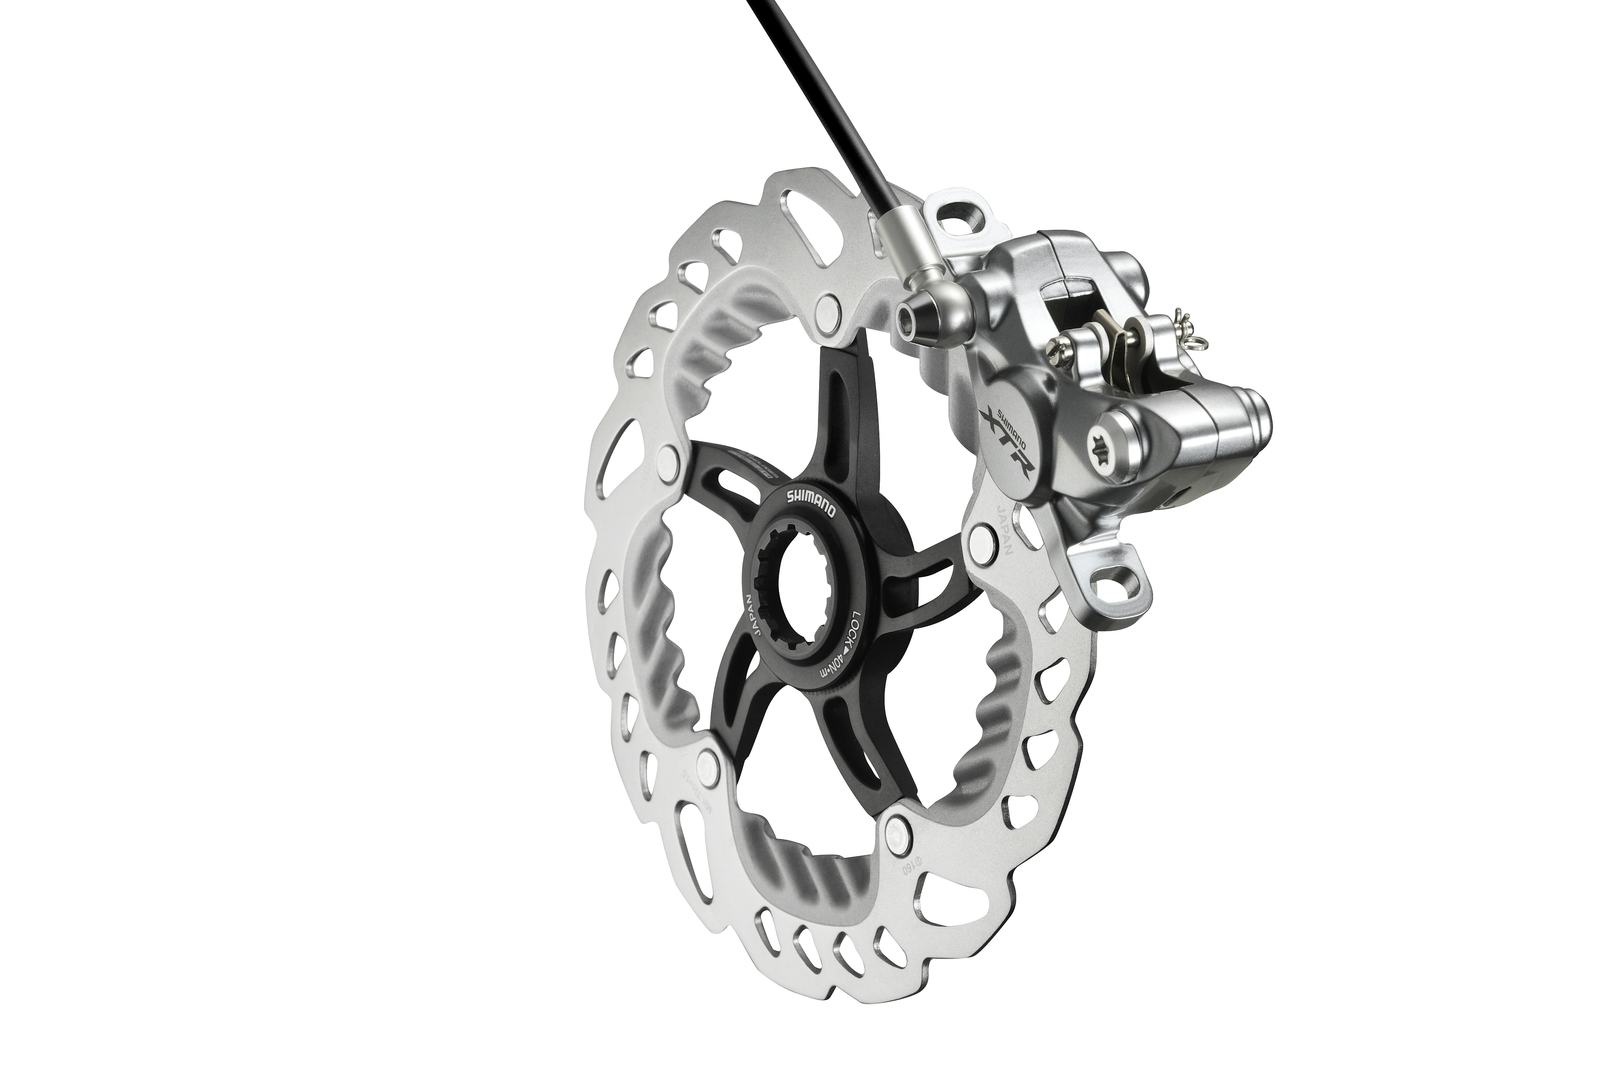 Shimano debuts its lightest hydraulic disc brake system overall the XTR line. - Photo Shimano
